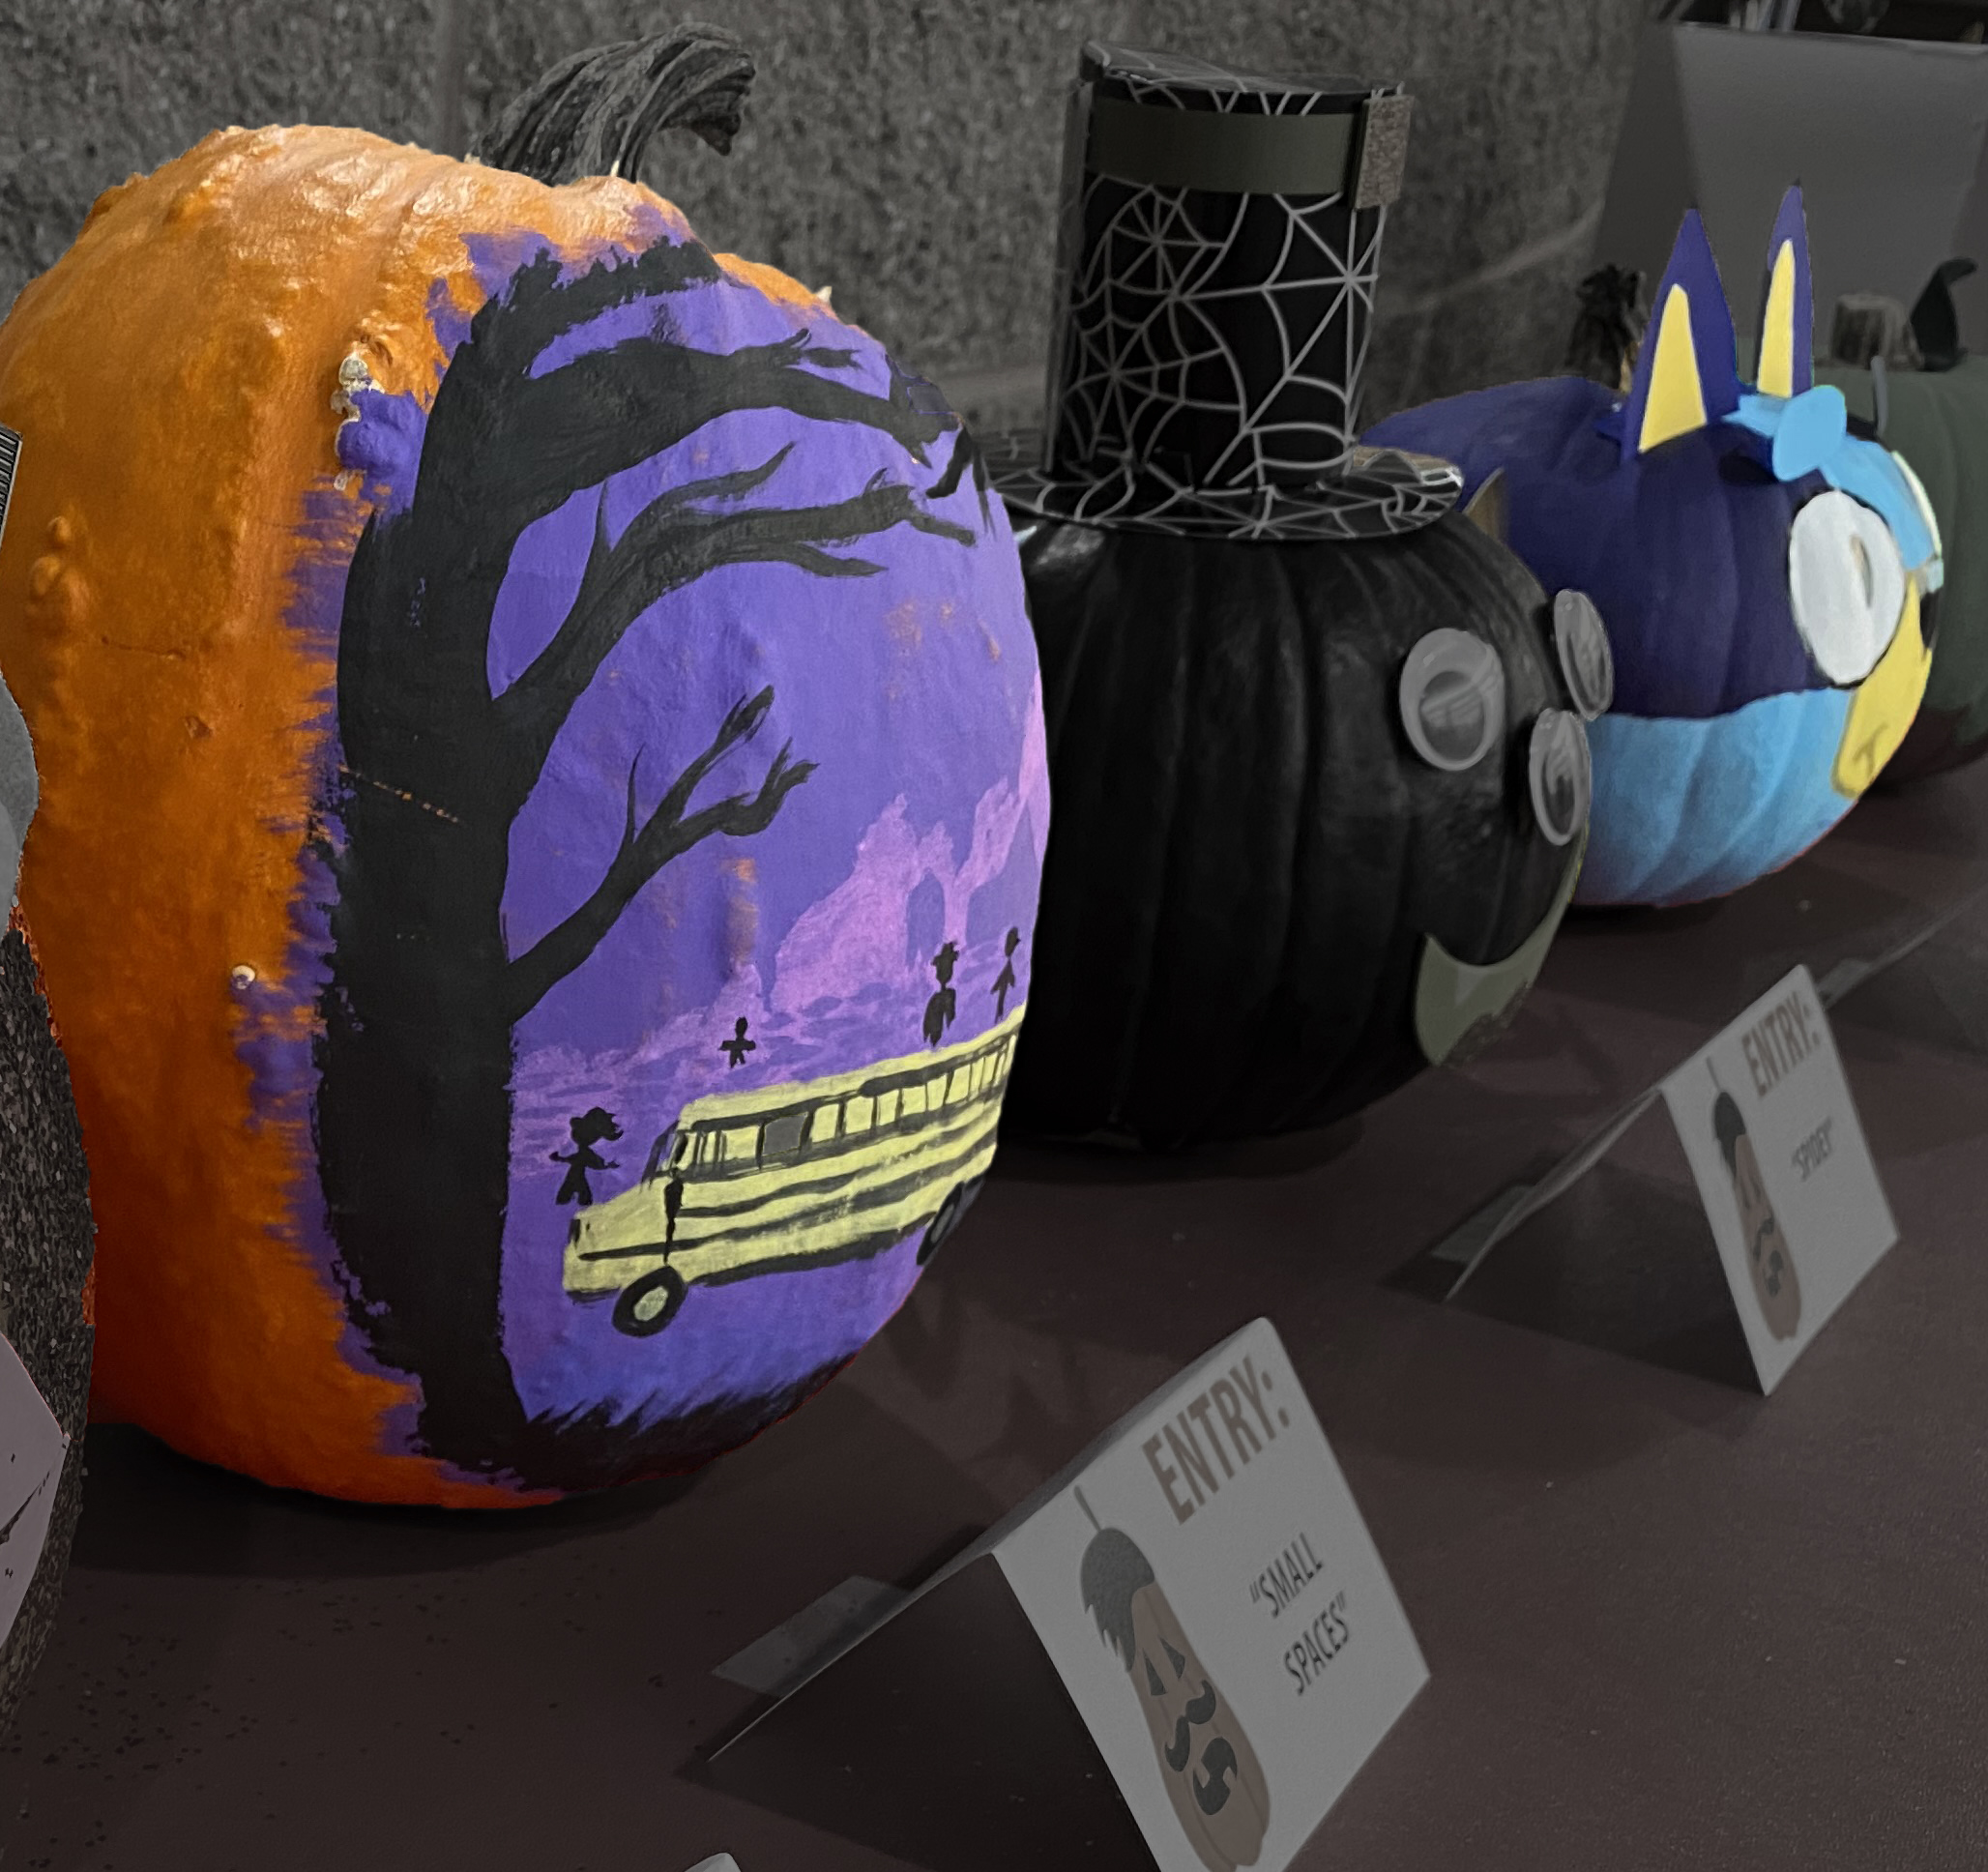 Winners announced in staff pumpkin decorating contest